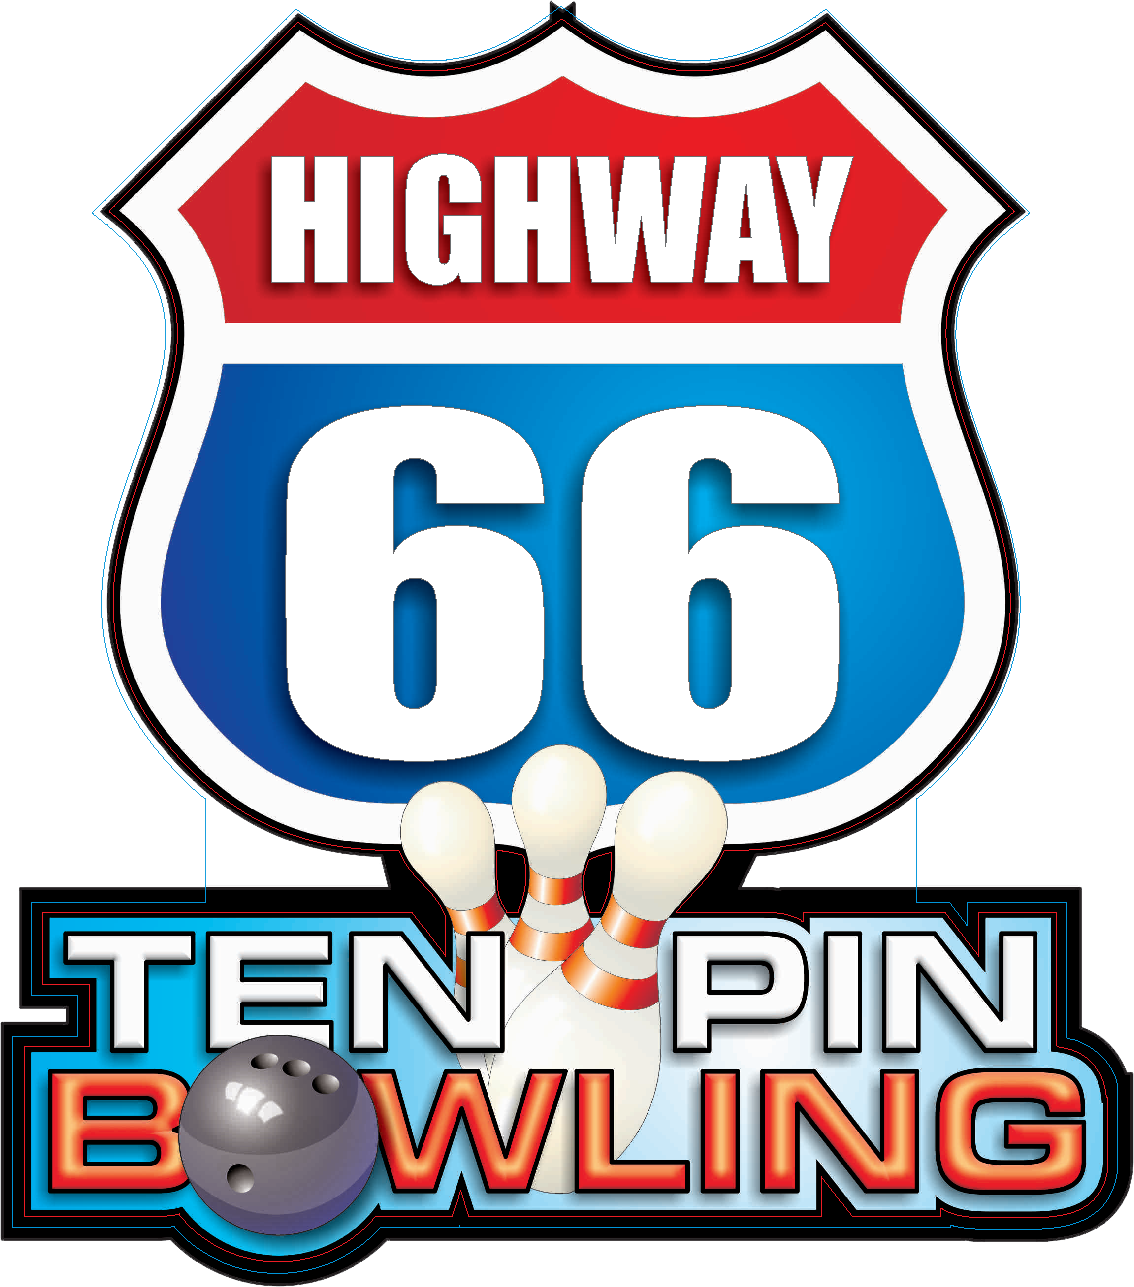 Based Above Beachcomber Amusements, Highway 66 Offers - 10 Highway 66 Bowling Pins (1134x1287)